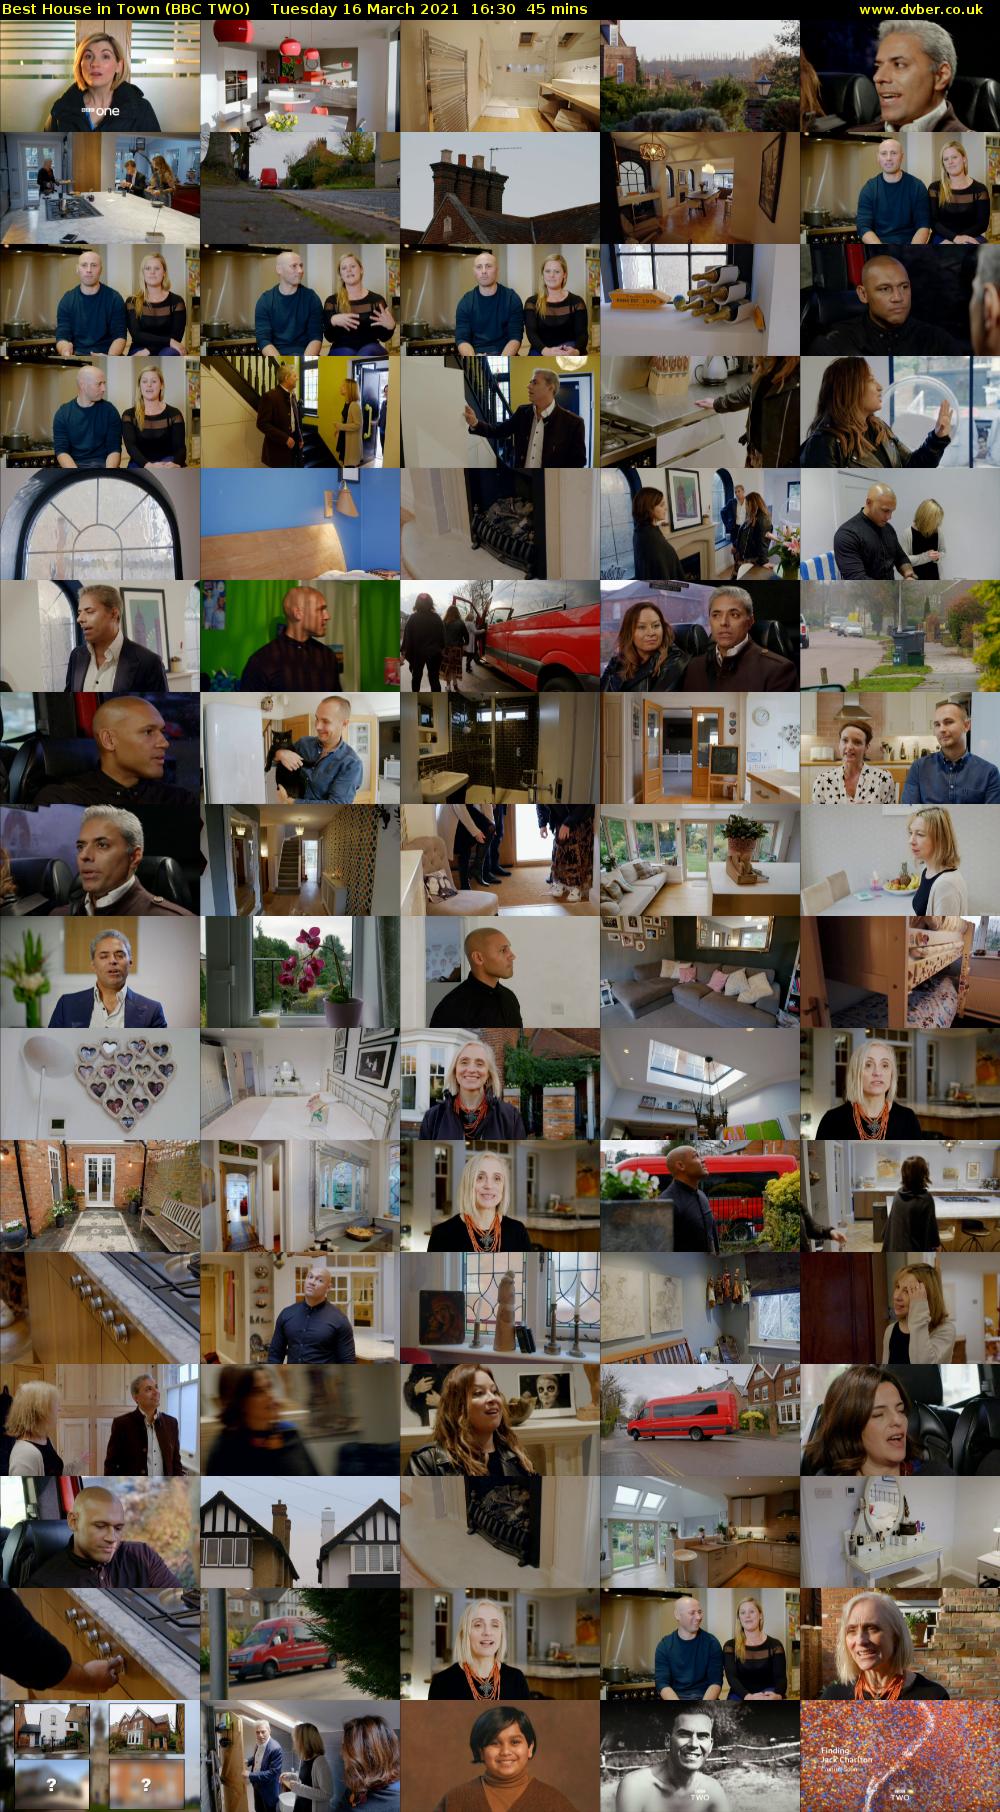 Best House in Town (BBC TWO) Tuesday 16 March 2021 16:30 - 17:15